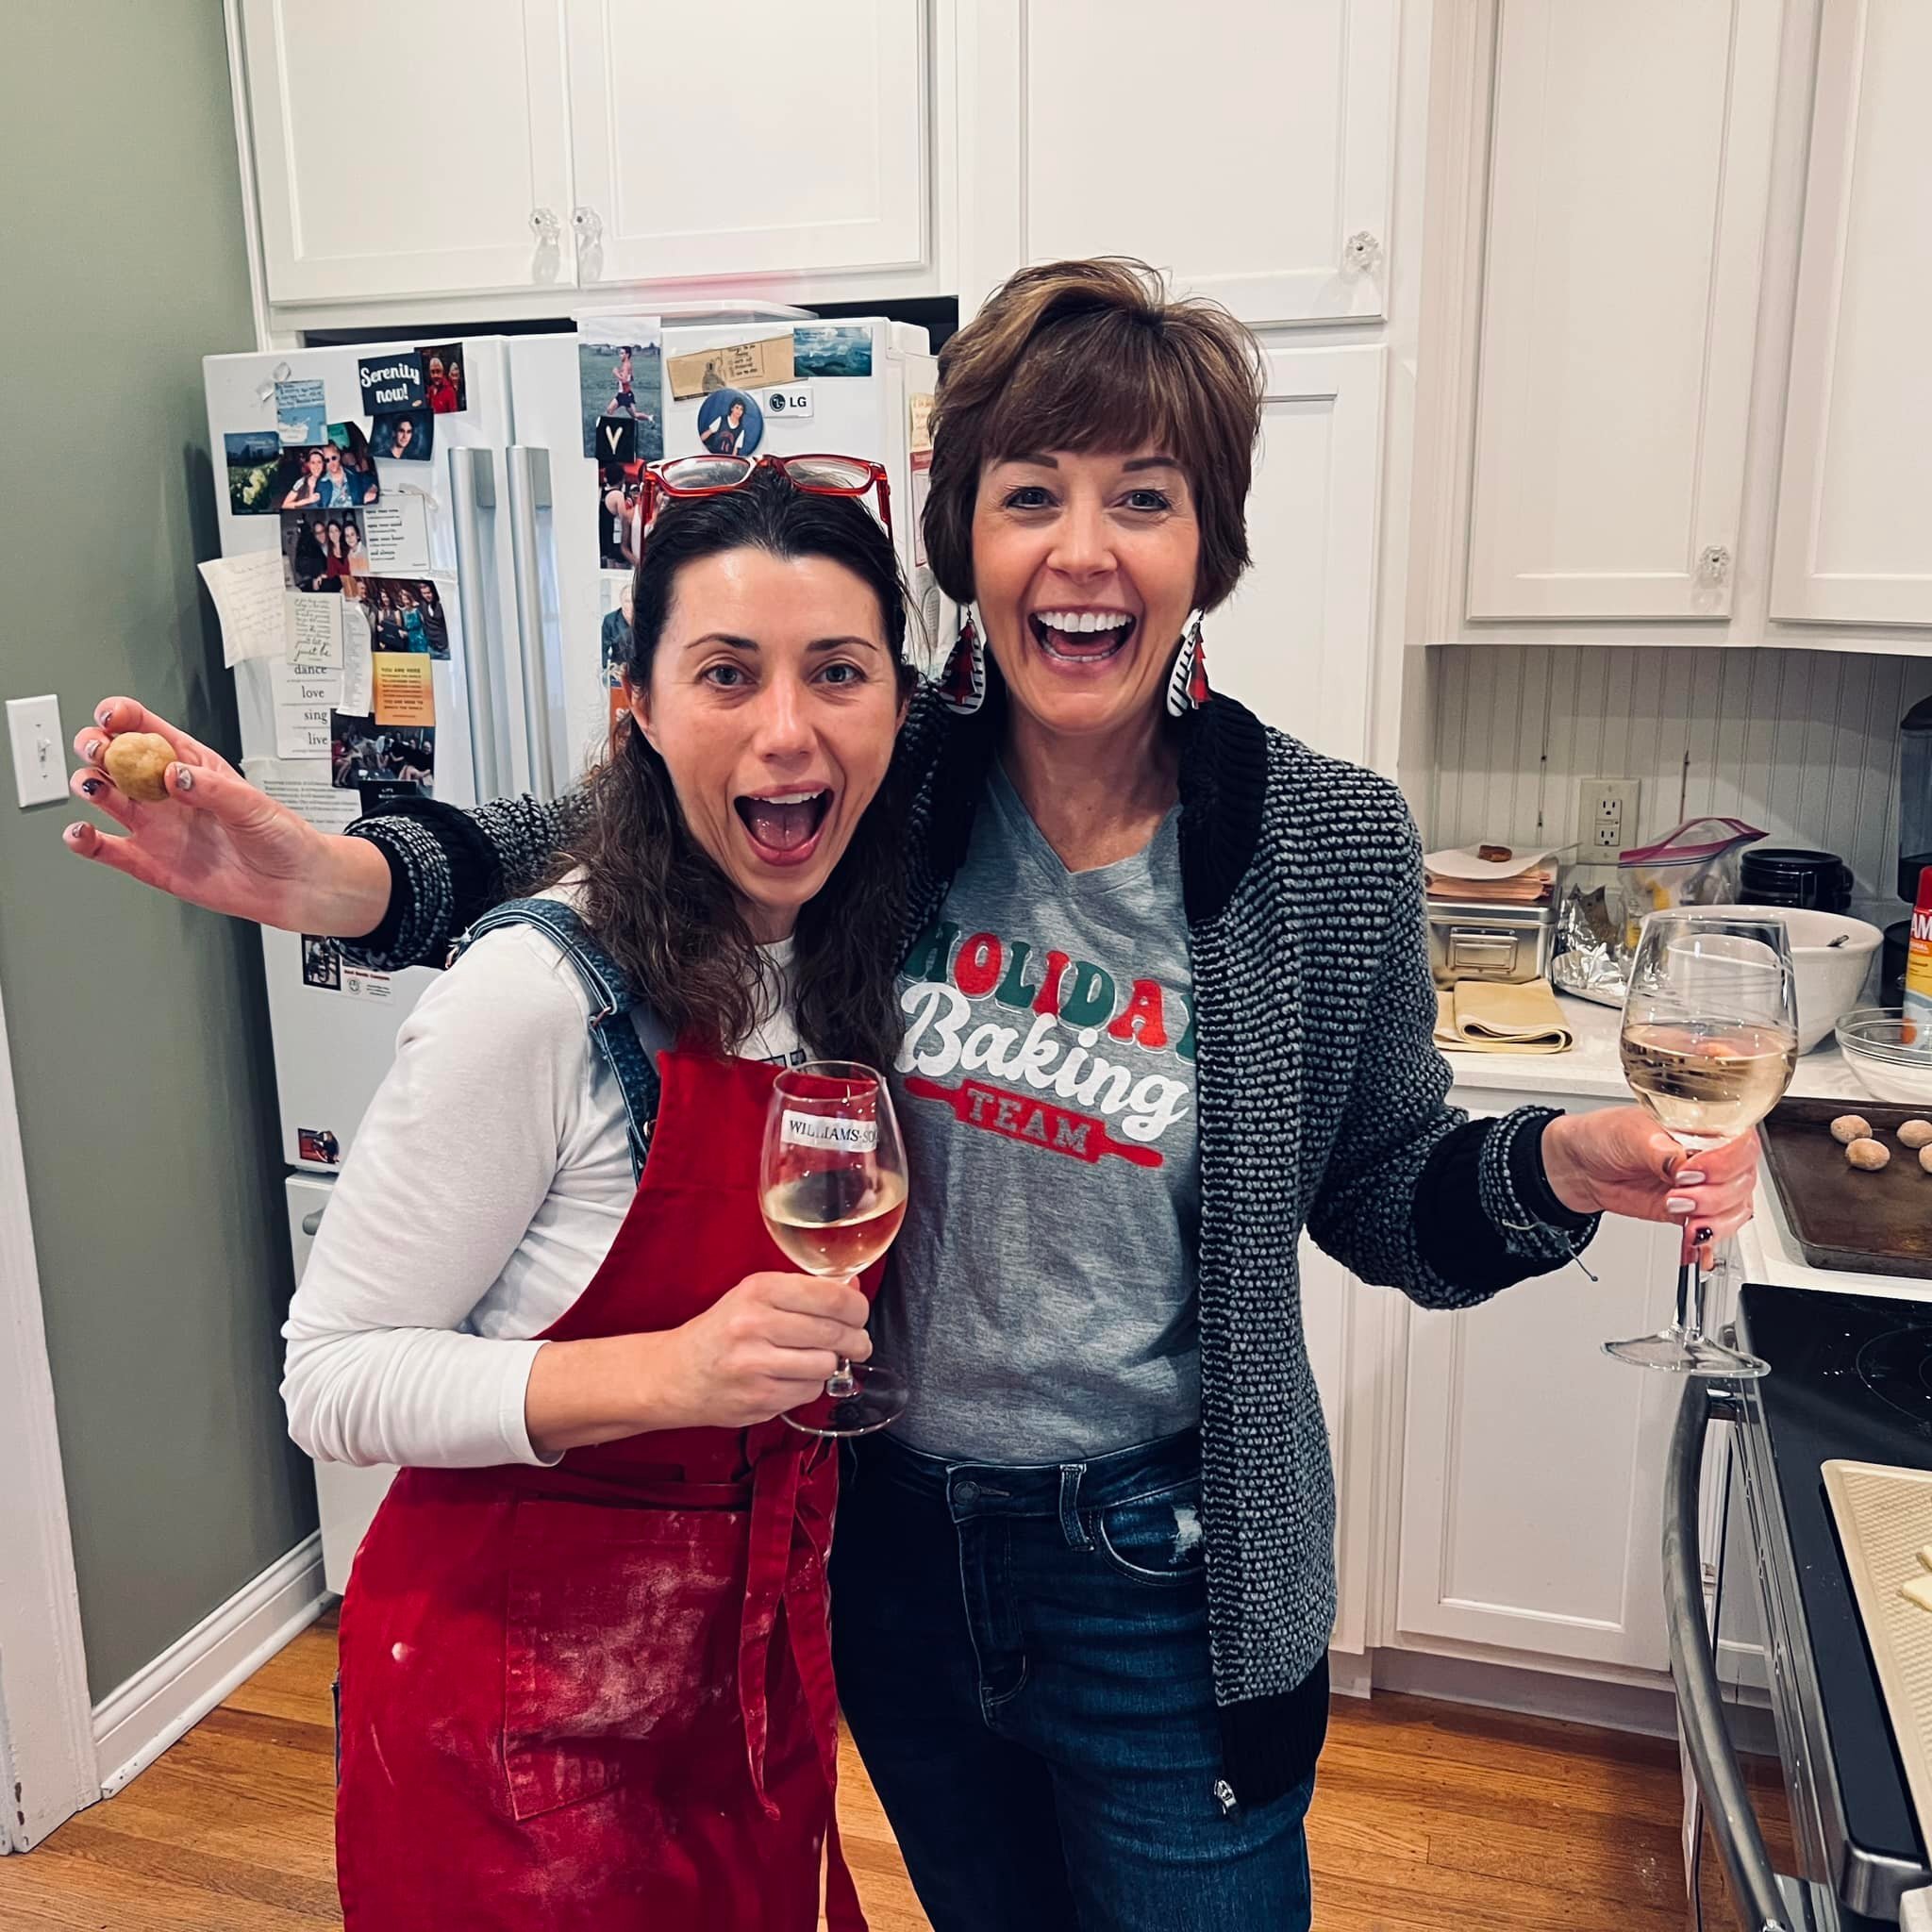 Lisa Almert &amp; I recruited a couple very special elves to help us with our favorite holiday tradition: BAKING - her peanut-butter chocolate blossoms and my cut-out sugar cookies w/ buttercream icing. The love and laughs make everything taste sweet